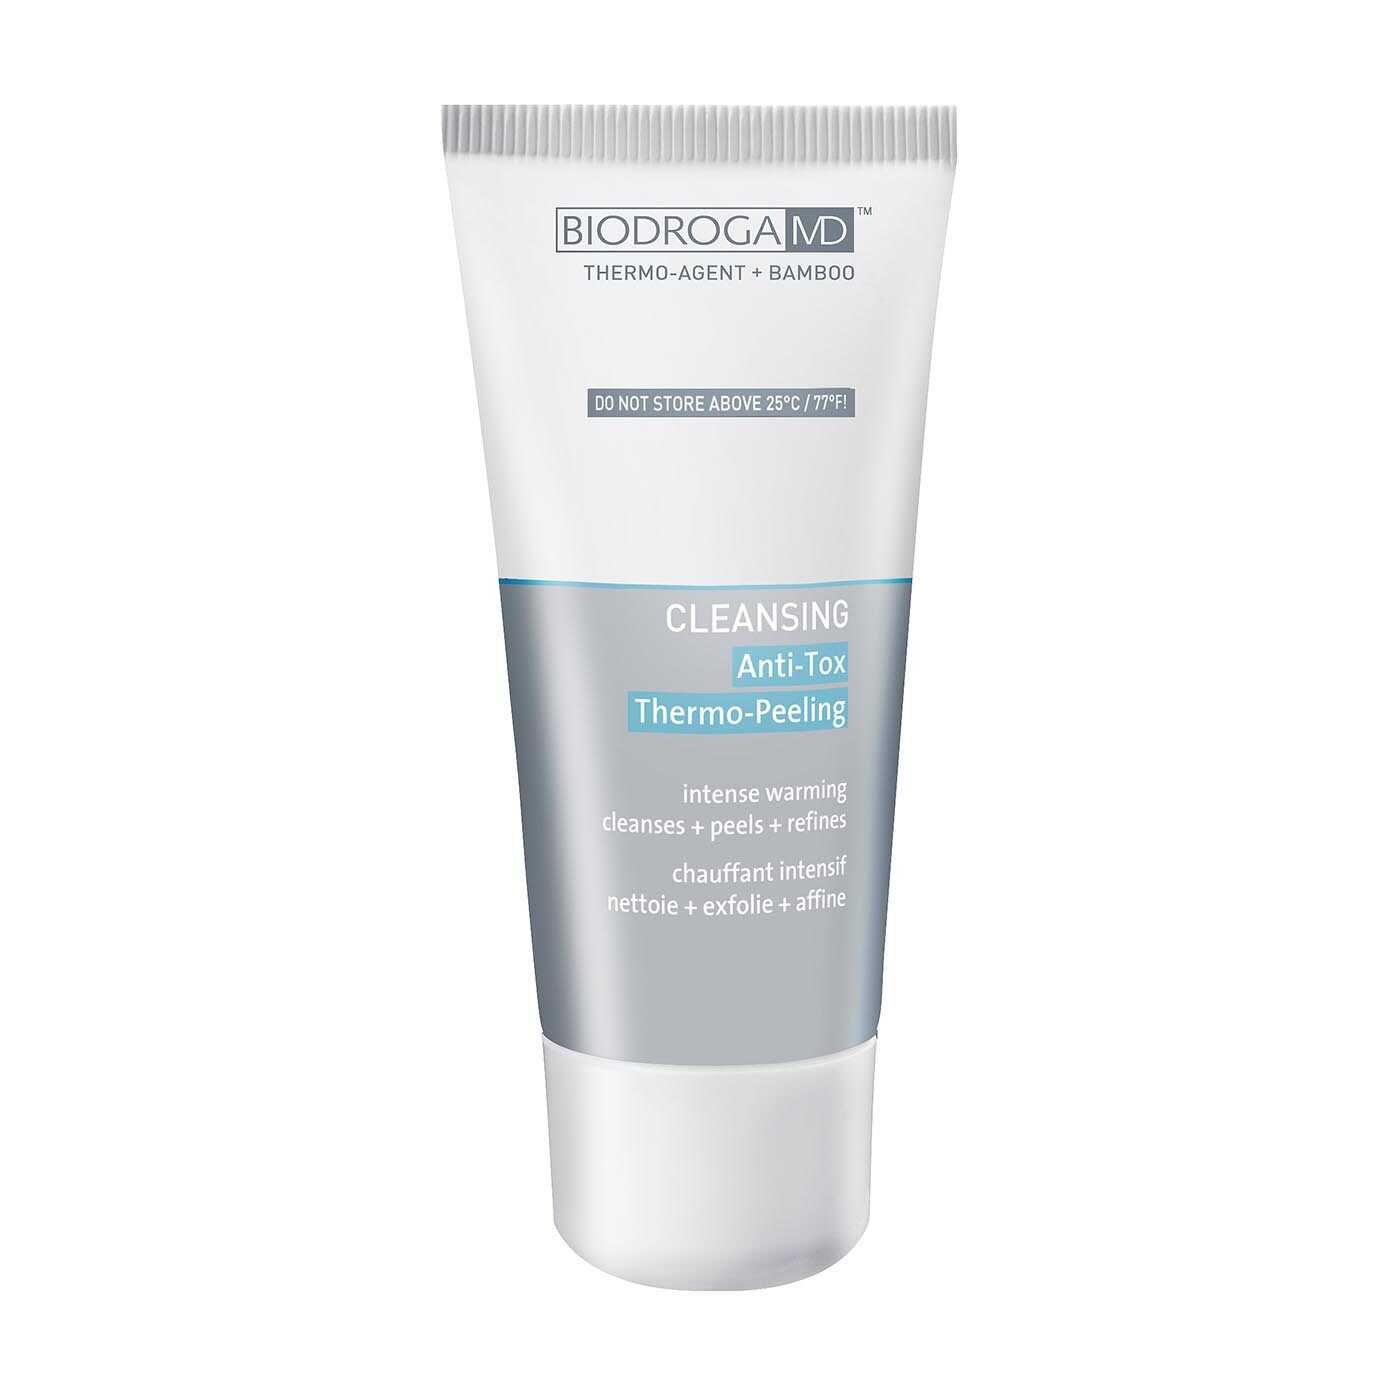 BIODROGA MD MD CLEANSING Detox Thermo Peeling